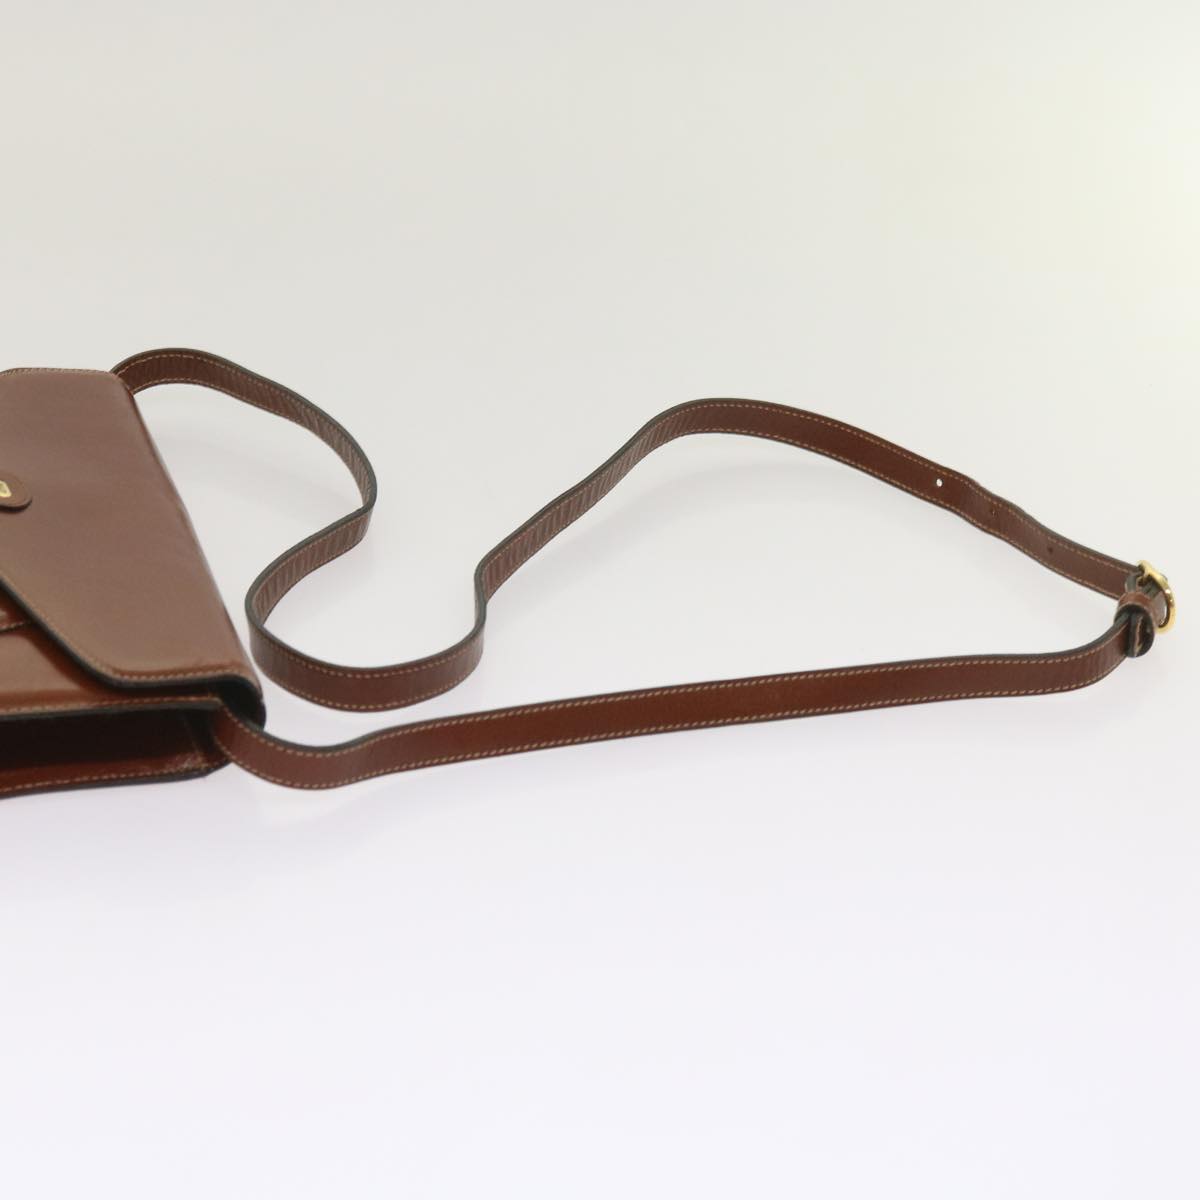 BALLY Shoulder Bag Leather Brown Auth 66086